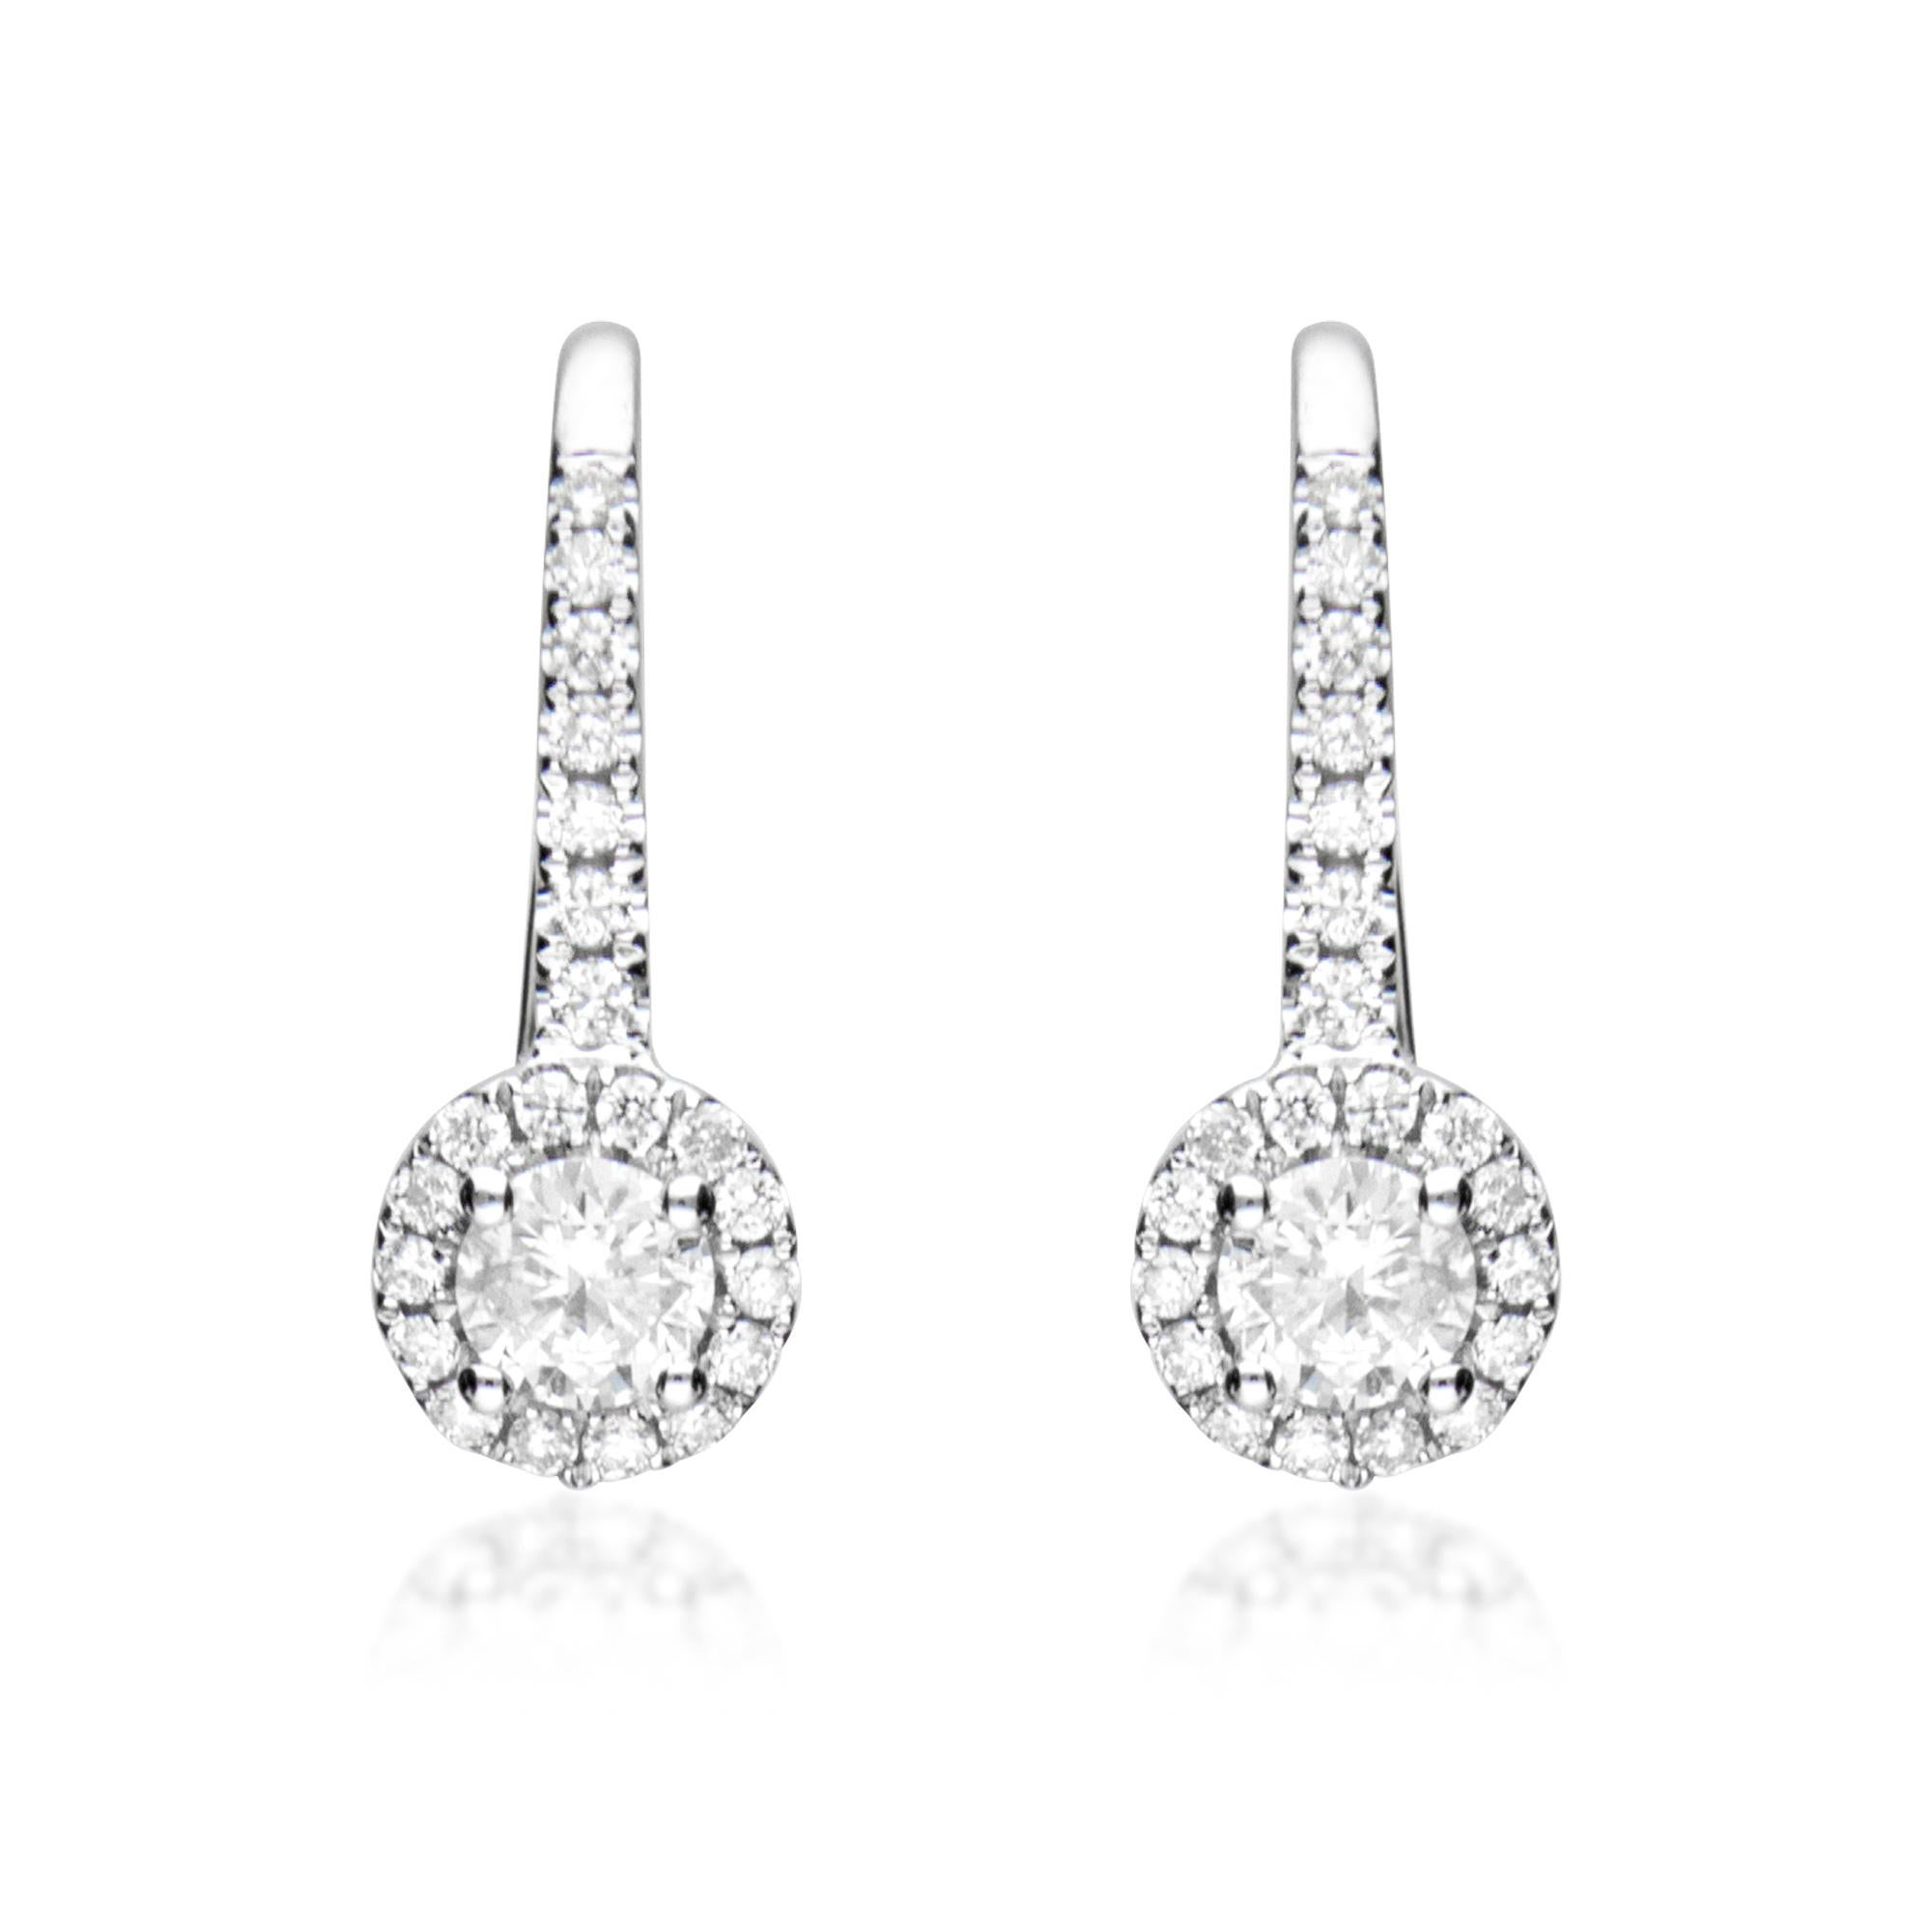 This beautiful Earring is crafted in 14-karat White gold and features 2 Pcs White Round diamonds 0.38 carat  surrounded with 66 Pcs White Round diamonds 0.28 carat in GH-SI quality. 
Crafted from 14 karat White gold these earrings come with high